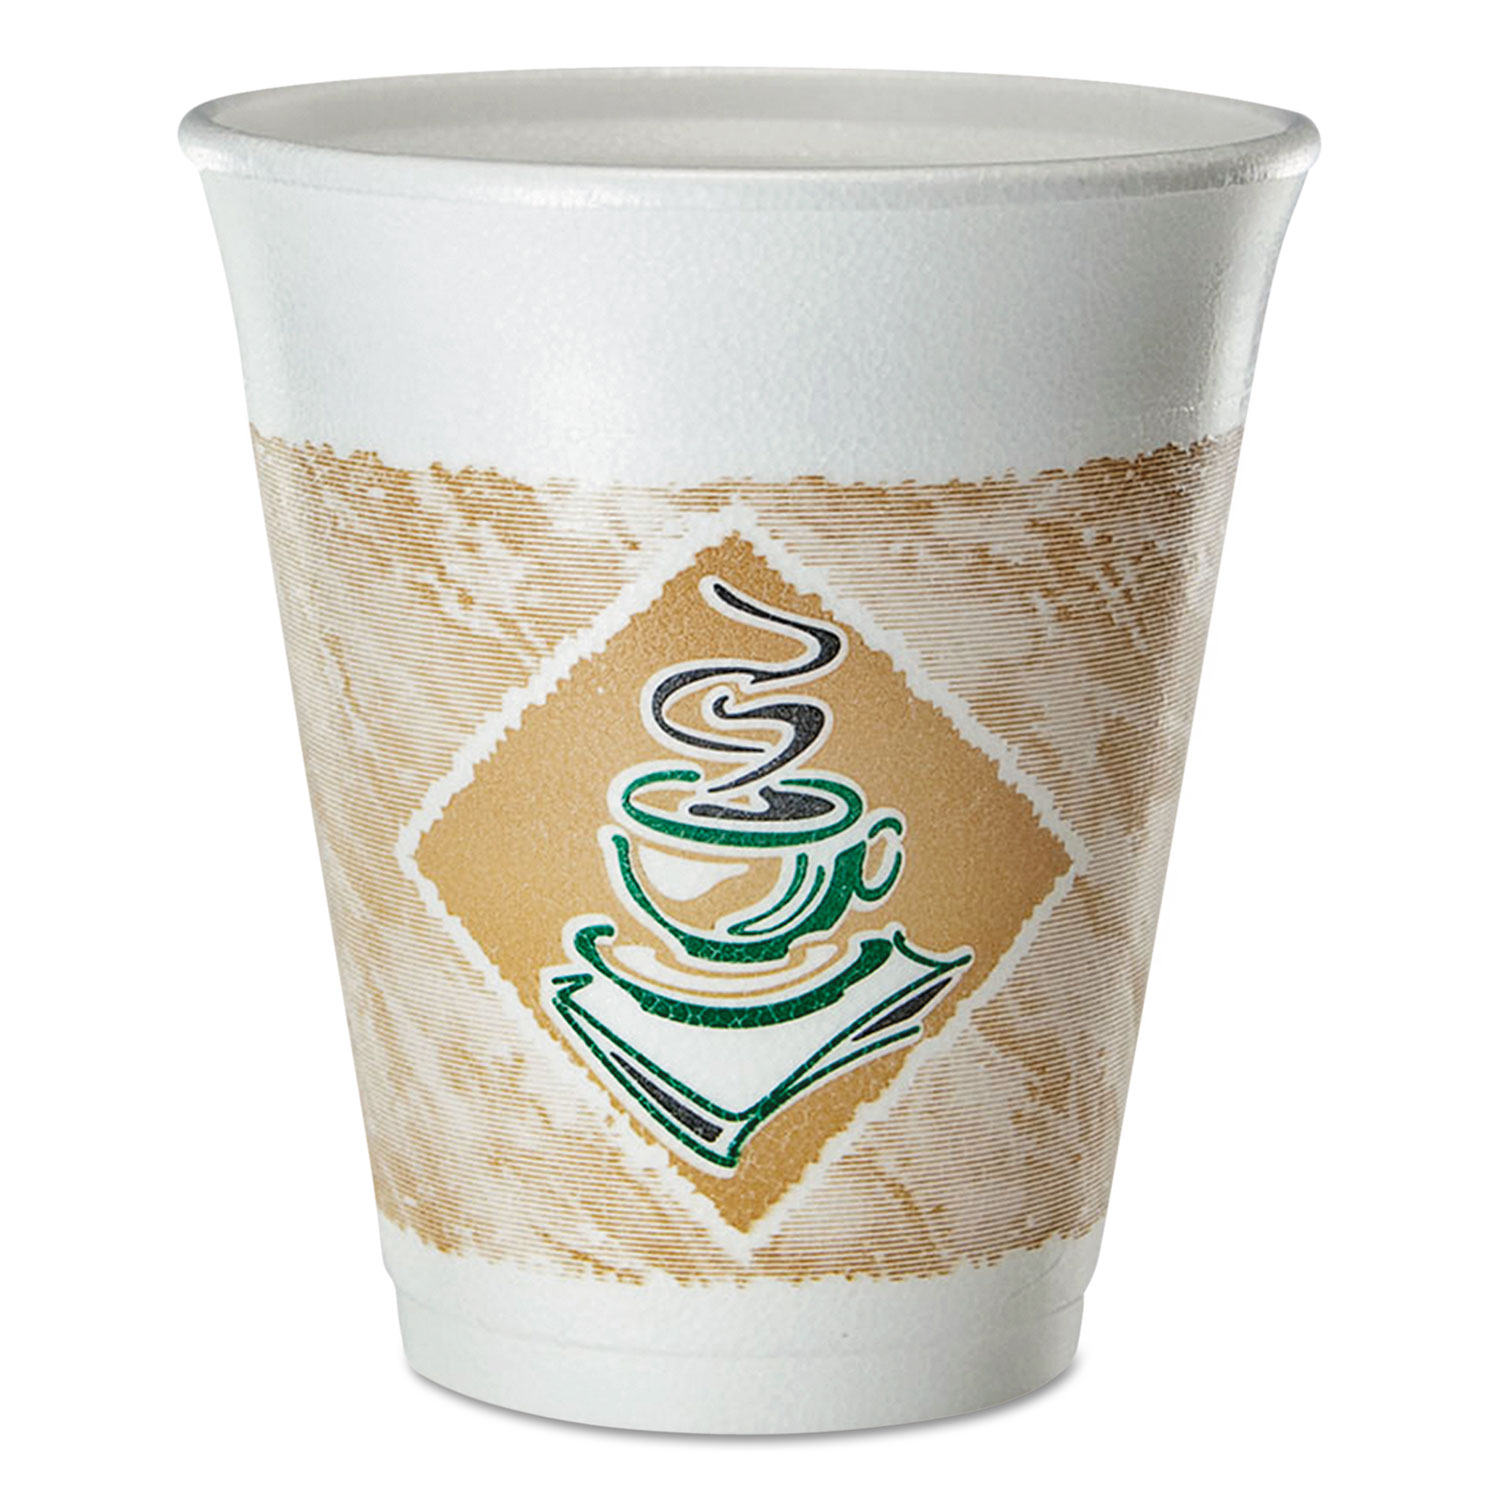  Dart 45357/03 Cafe G Foam Hot/Cold Cups, 8 oz, Brown/Green/White, 25/Pack (DCC8X8GPK) 